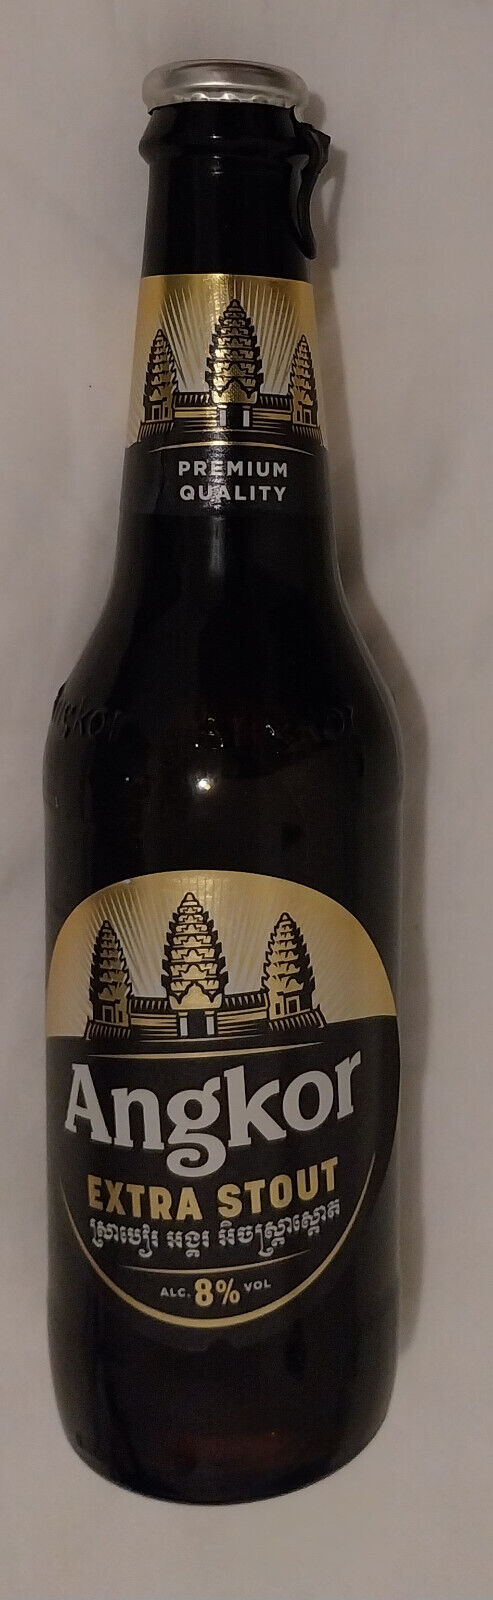 Rare Beer bottle 0,33 l Angkor Extra Stout from Cambodia